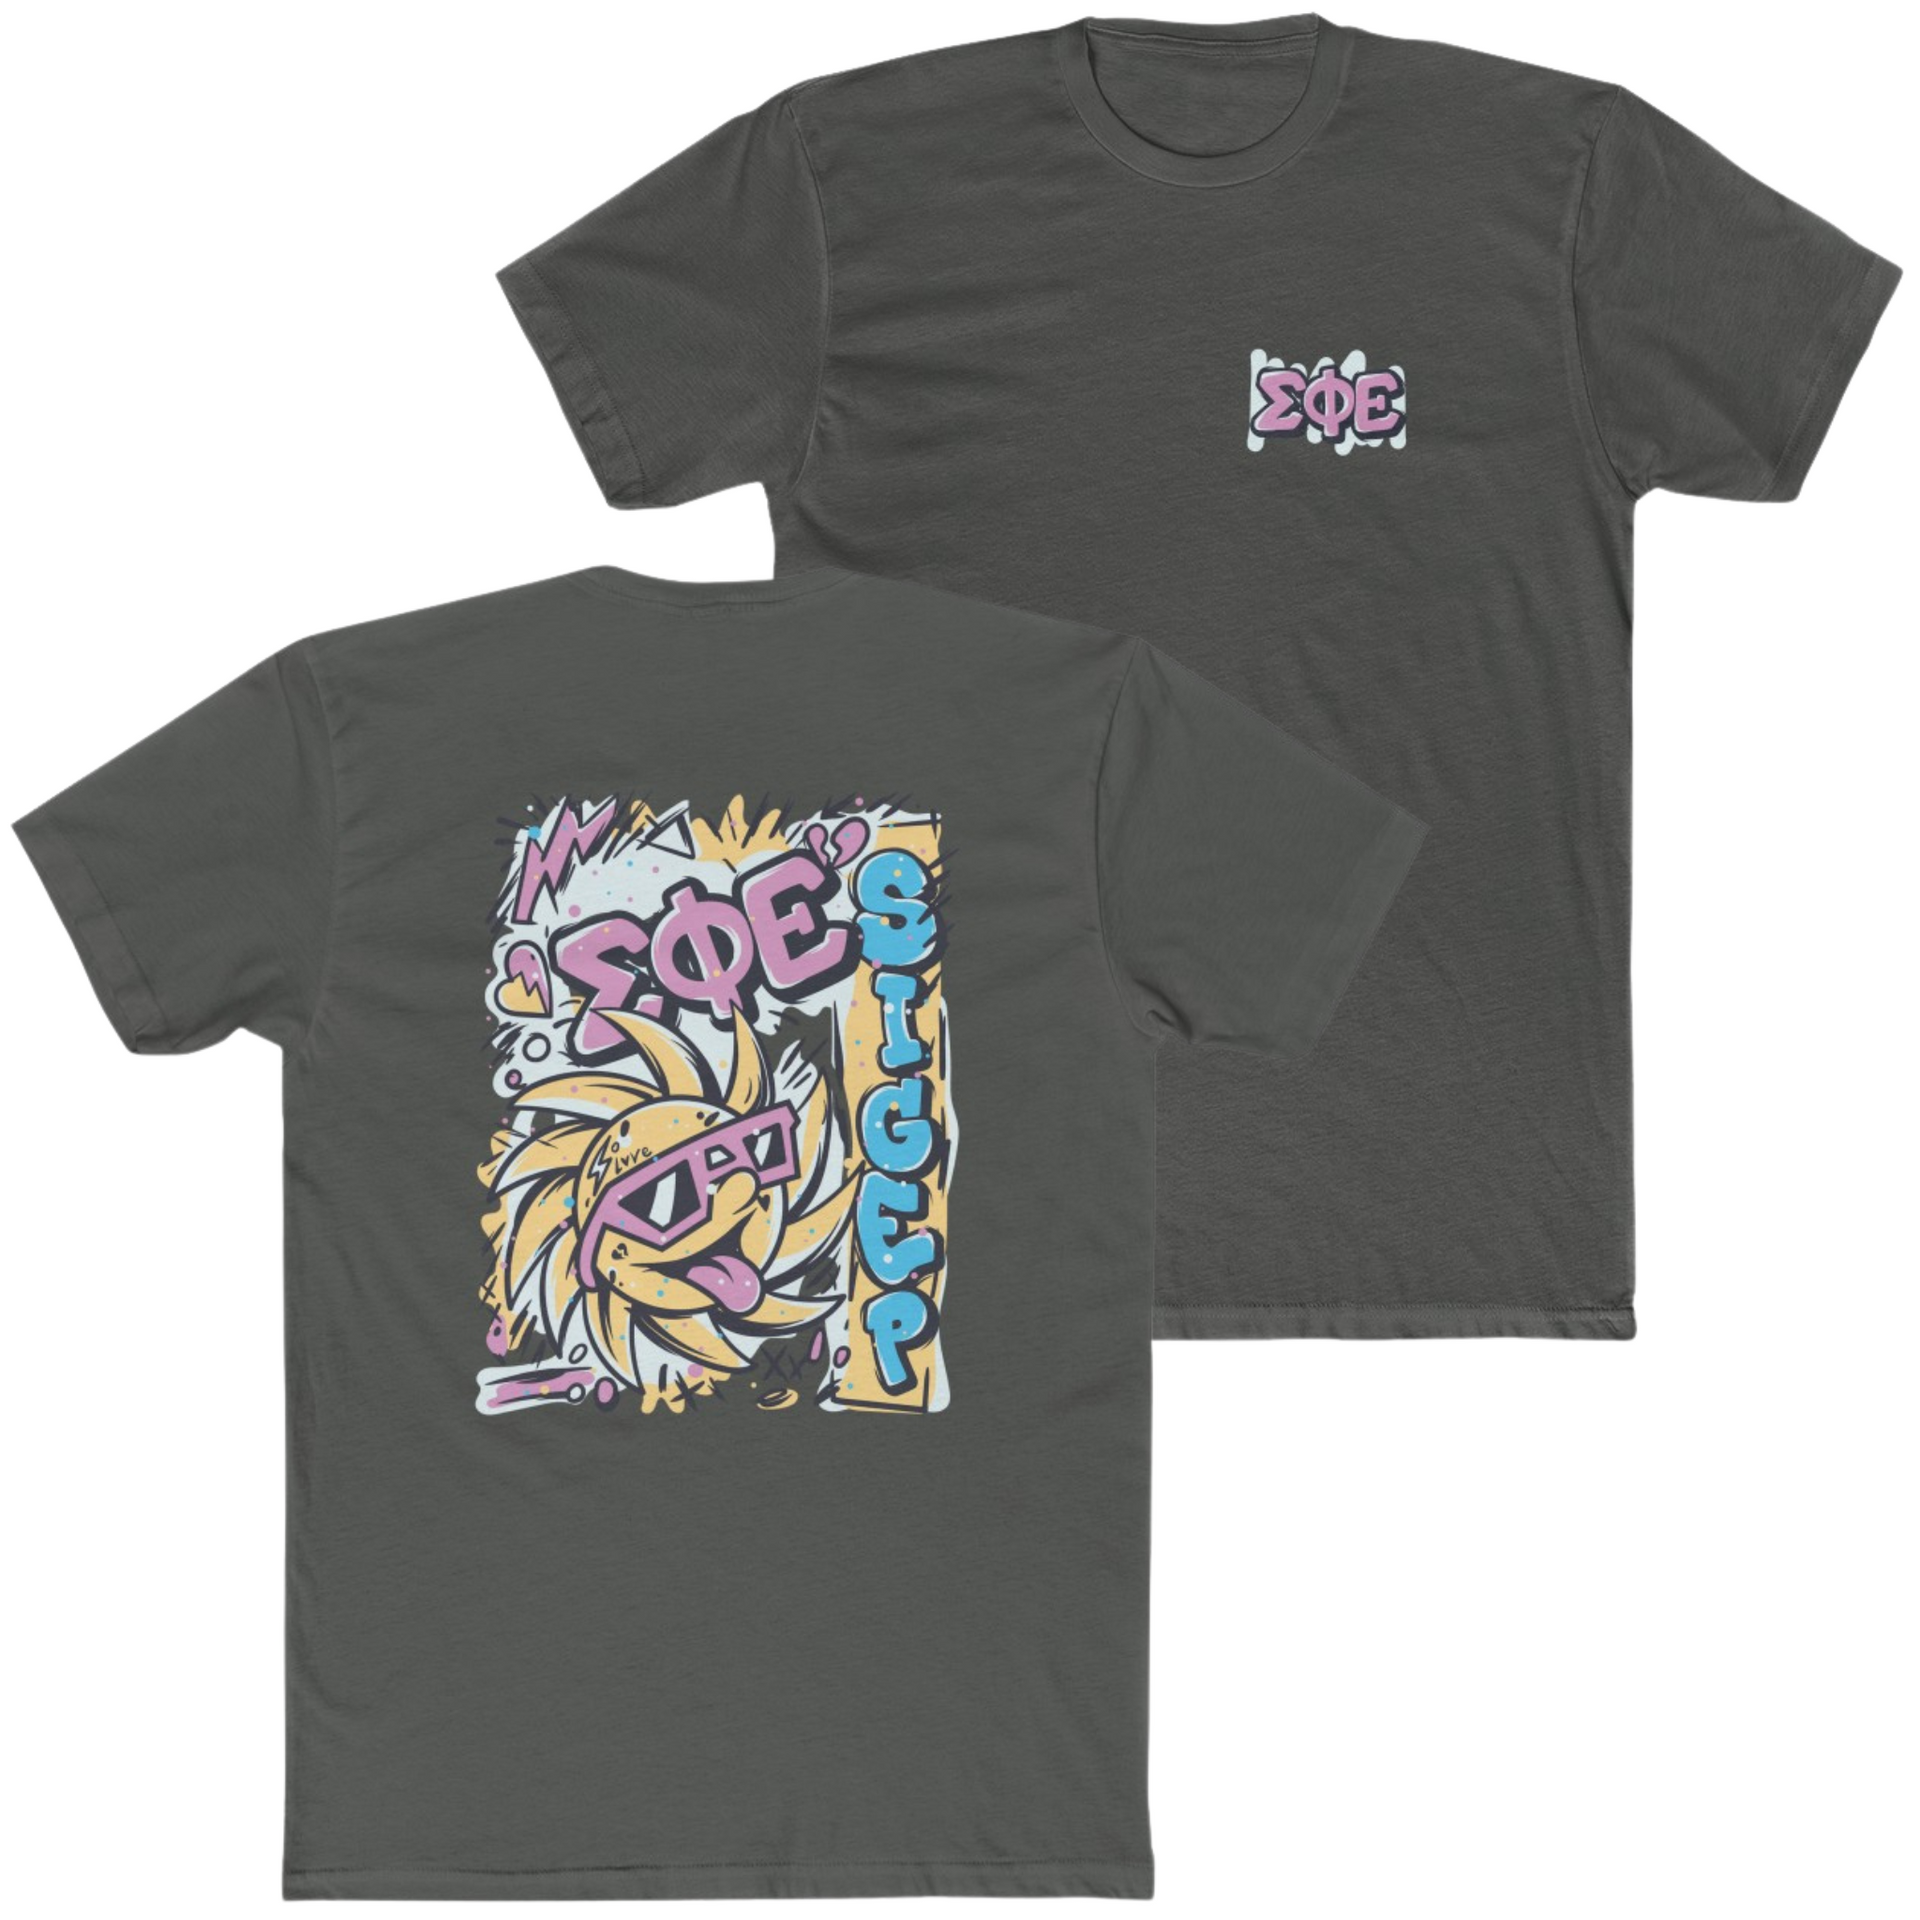 Grey Sigma Phi Epsilon Graphic T-Shirt | Fun in the Sun | SigEp Clothing - Campus Apparel